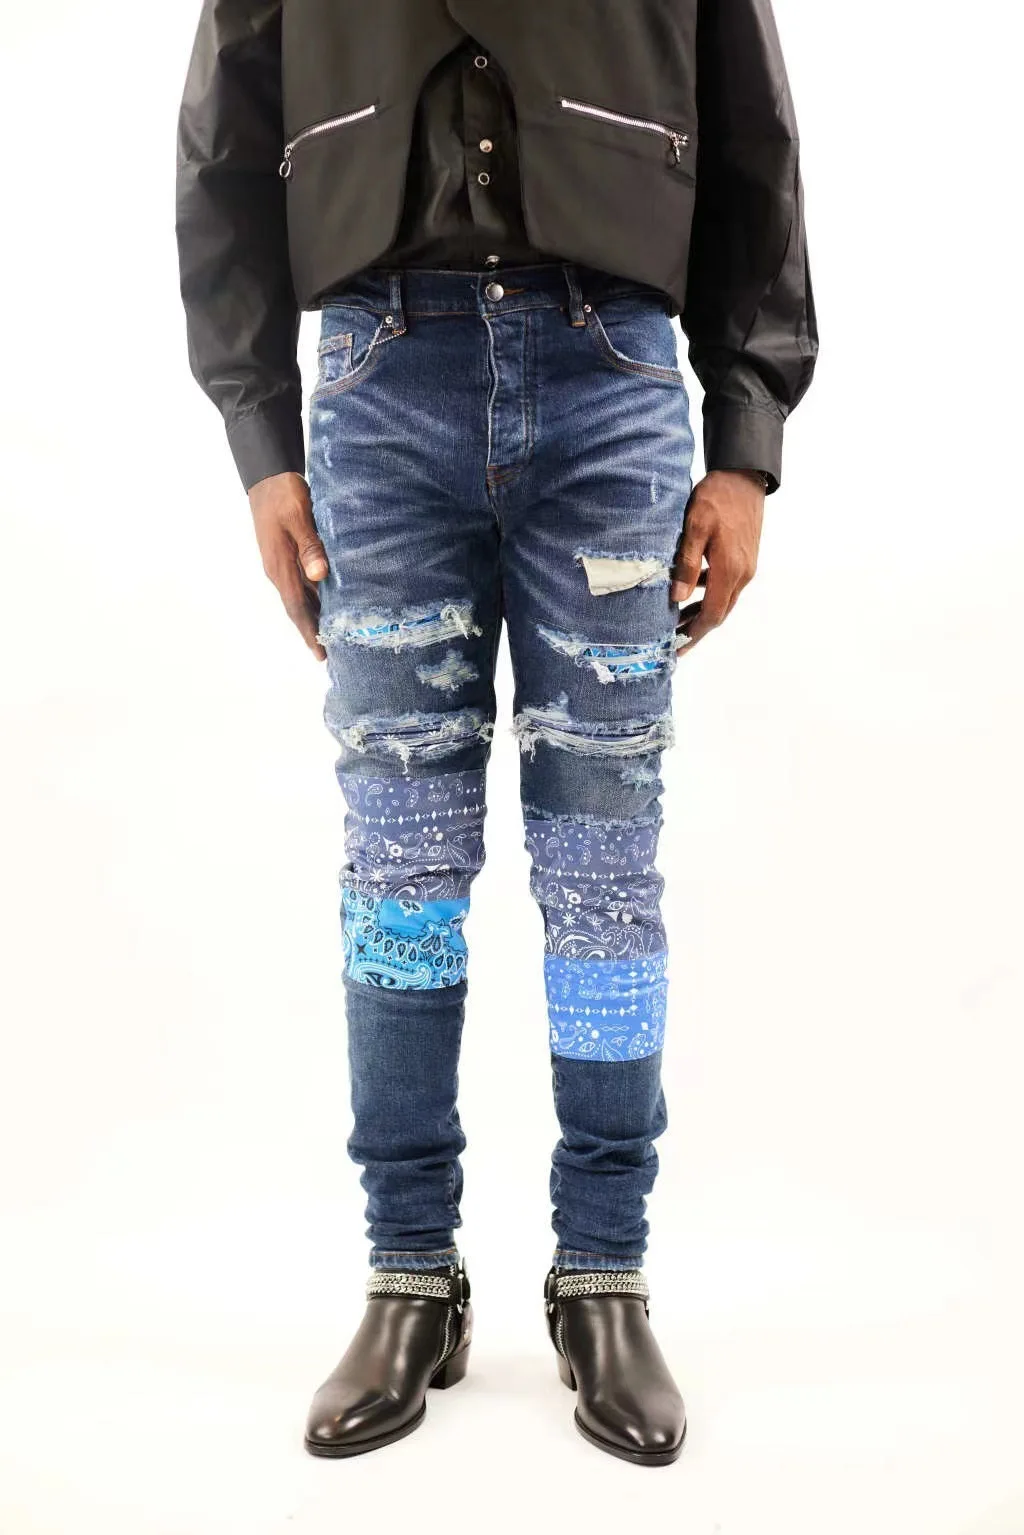 New 2022 Fashion Male Casual Blue Men's Jeans Patch Beggar Pants High Street Youth Stretch Slim Hole Patch Denim Pants Trousers